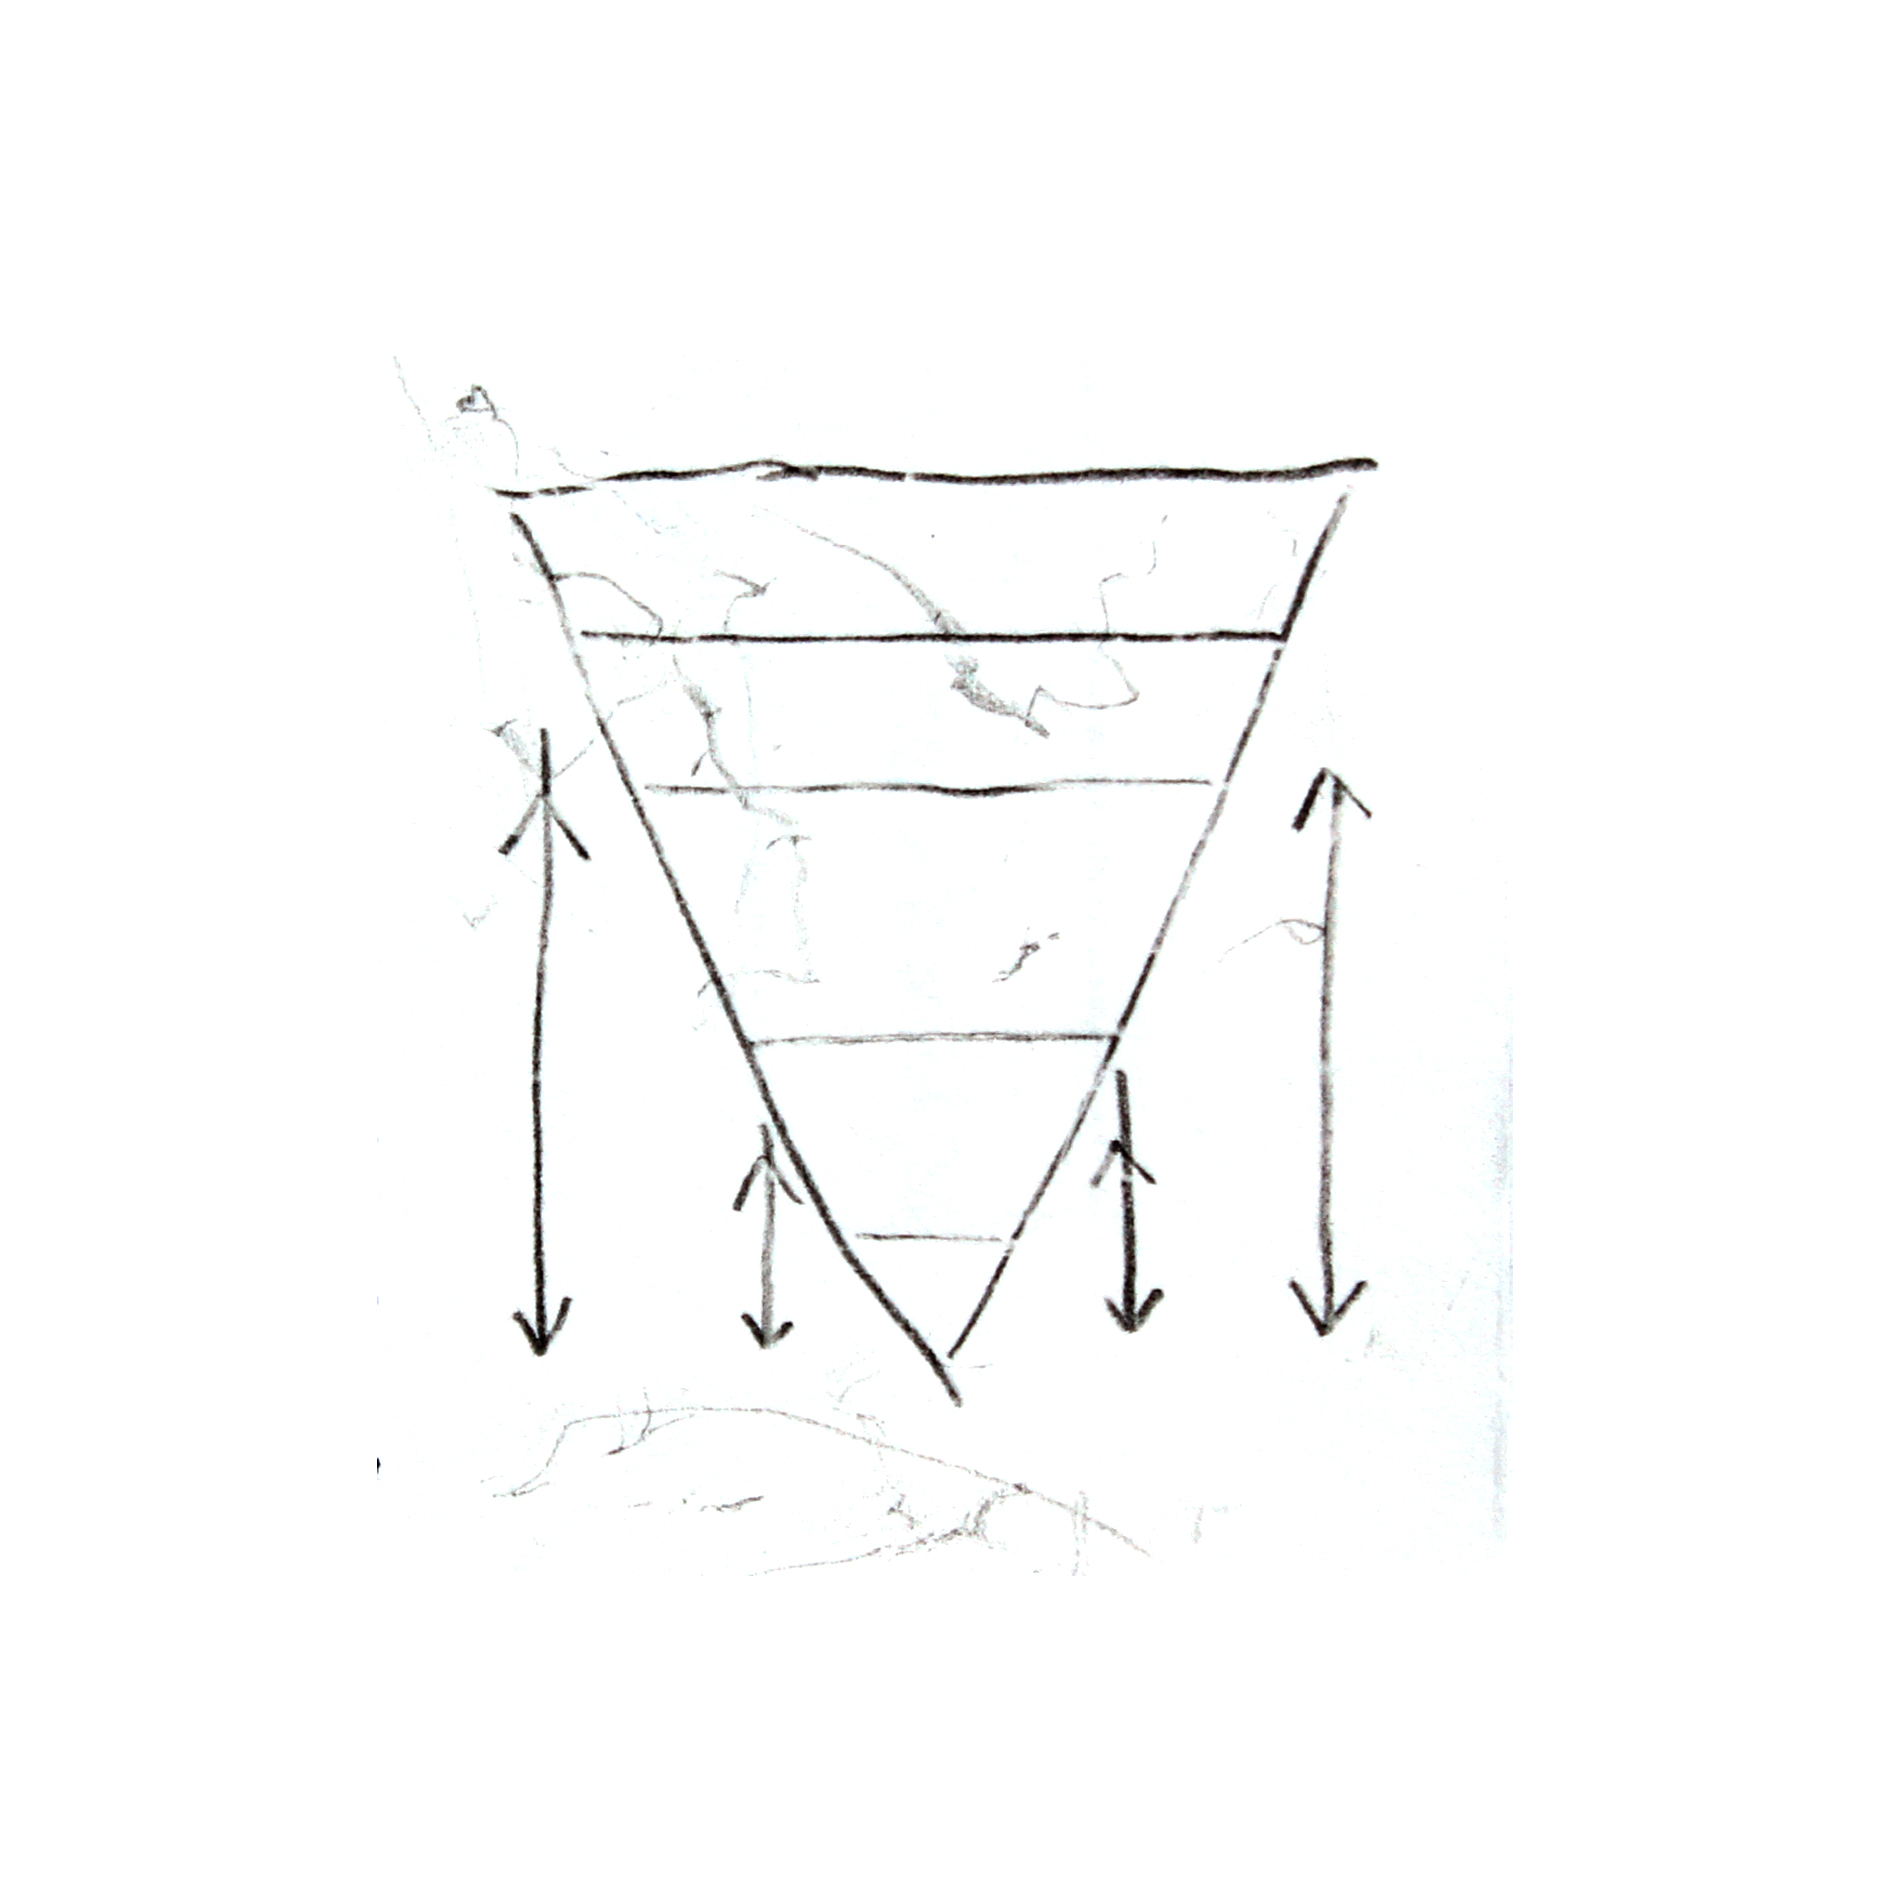 Drawing of an inverted triangle diagram by Jo Townshend